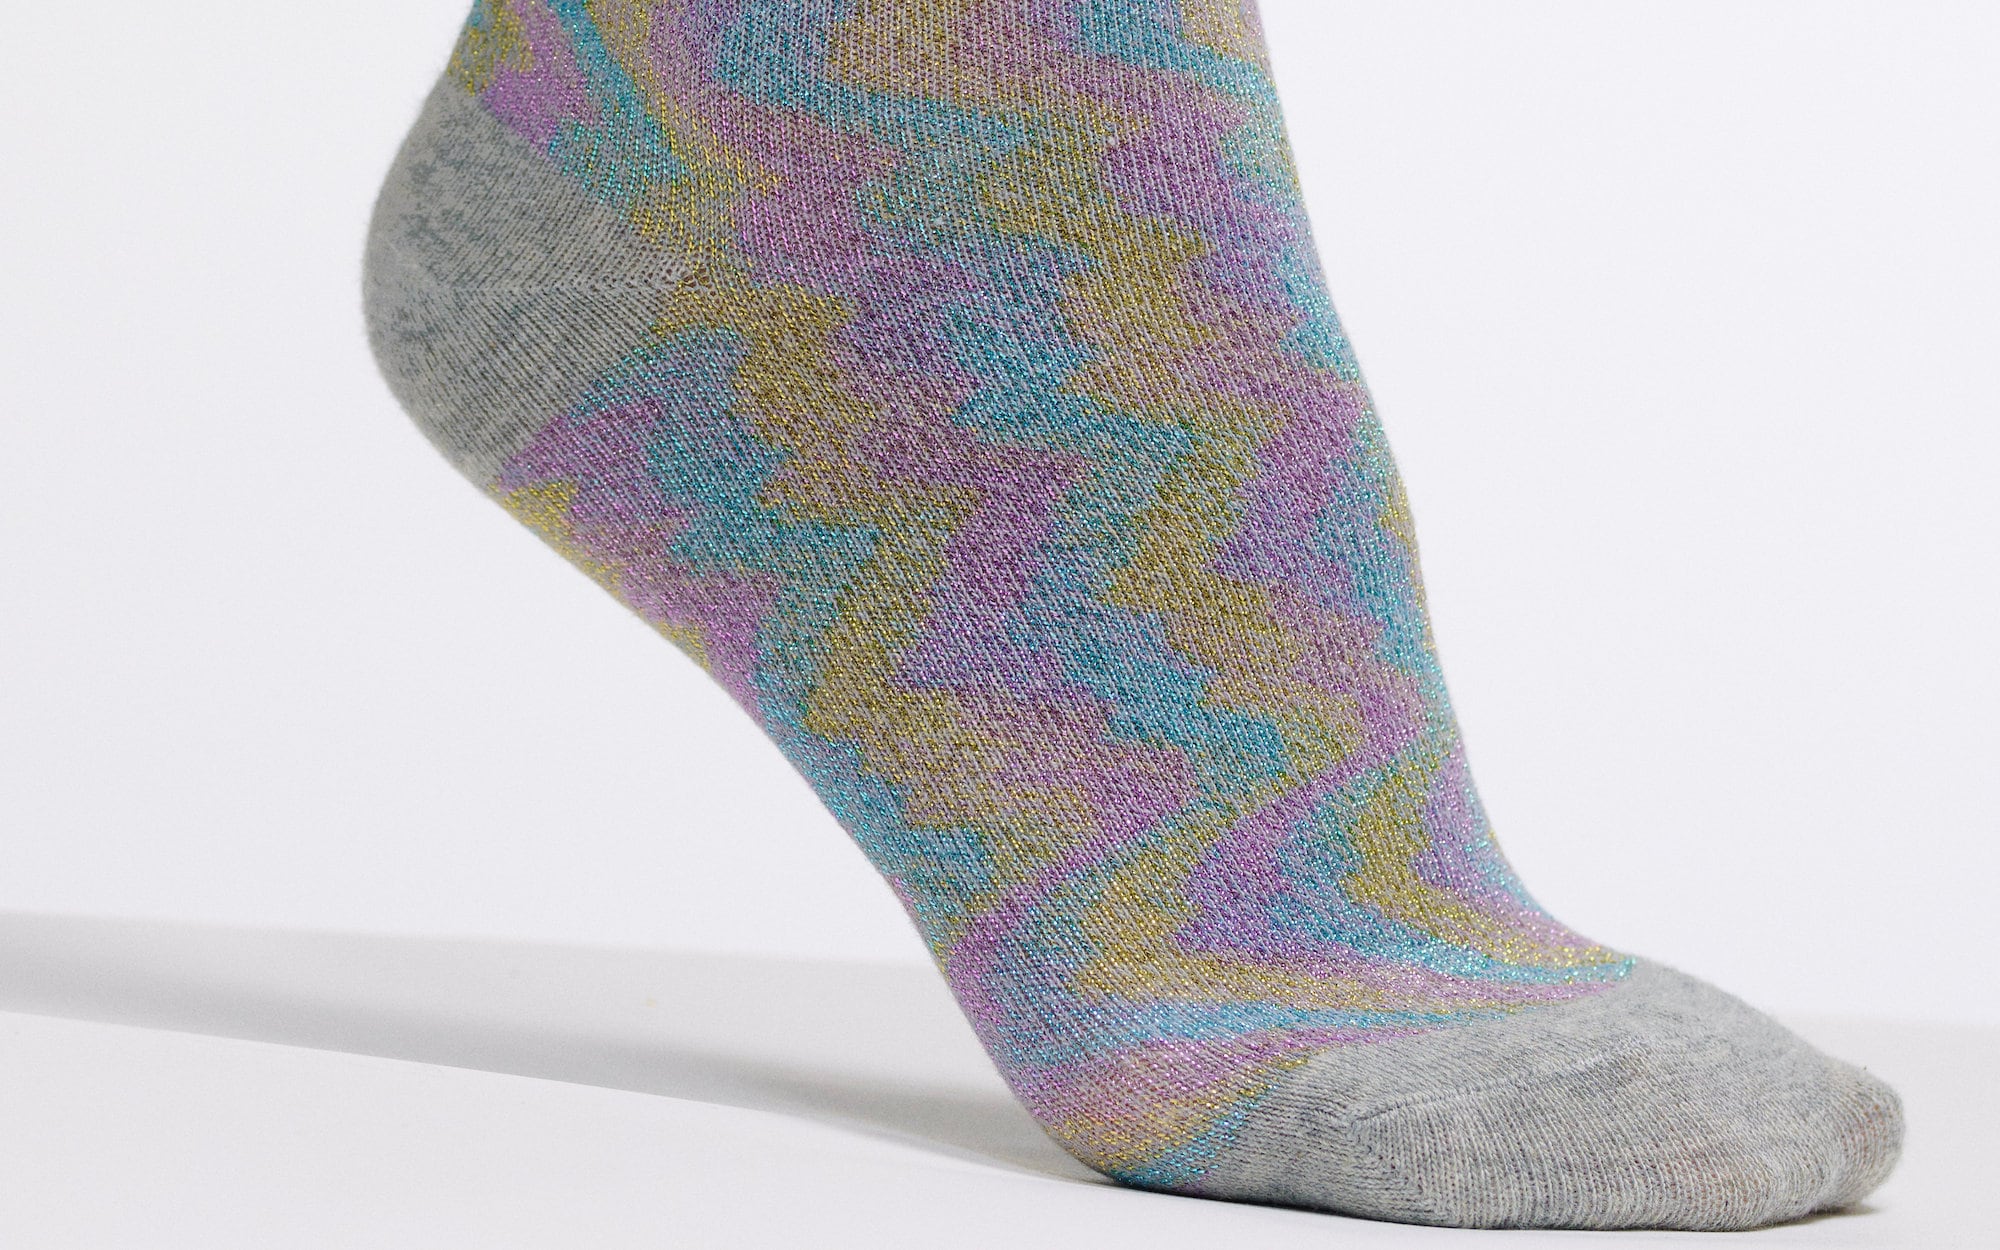 The Silver Holo Oil Slick Socks | Cozy and Sensible Yet Shiny Rainbow | Athletic Gray with Sparkly Oil Slick Effect | Goose Taffy